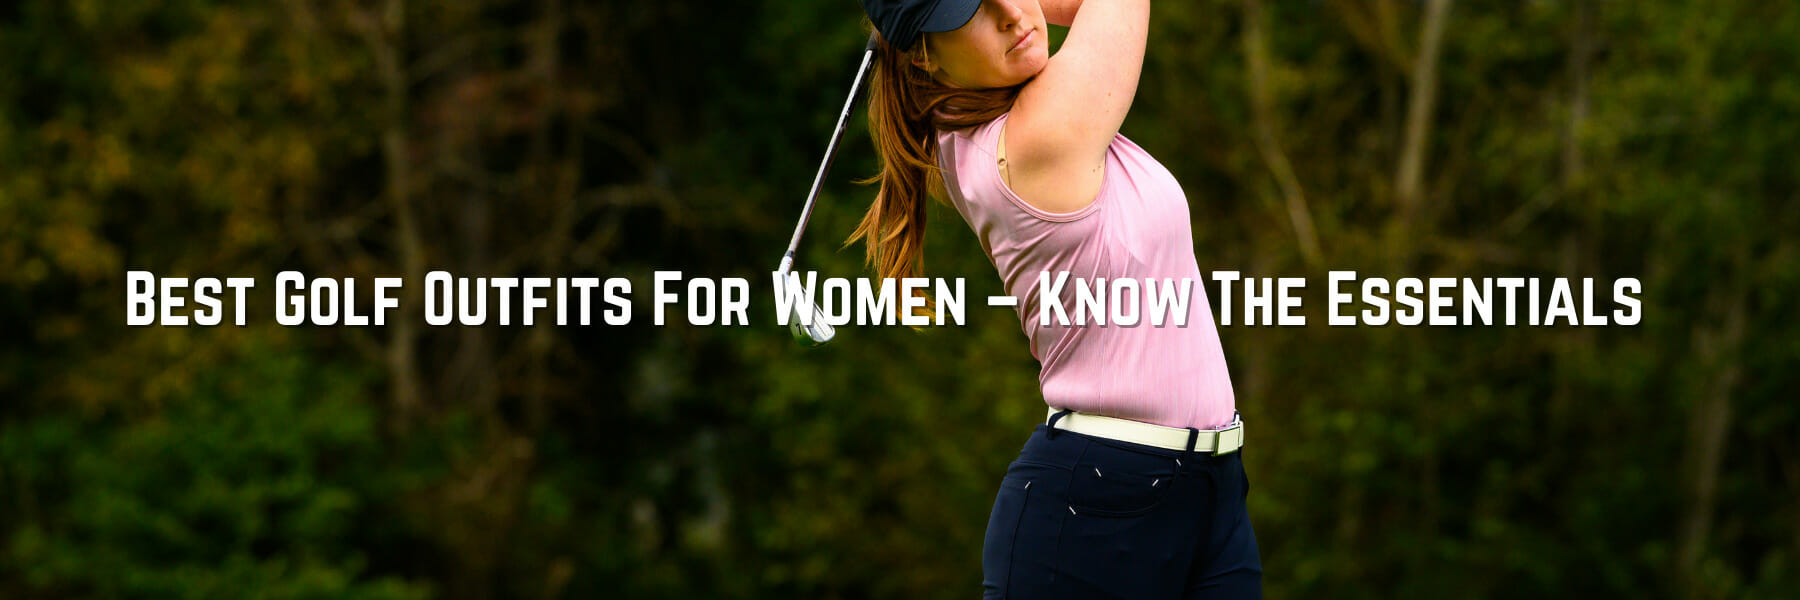 Best Golf Outfits For Women - Know The Essentials